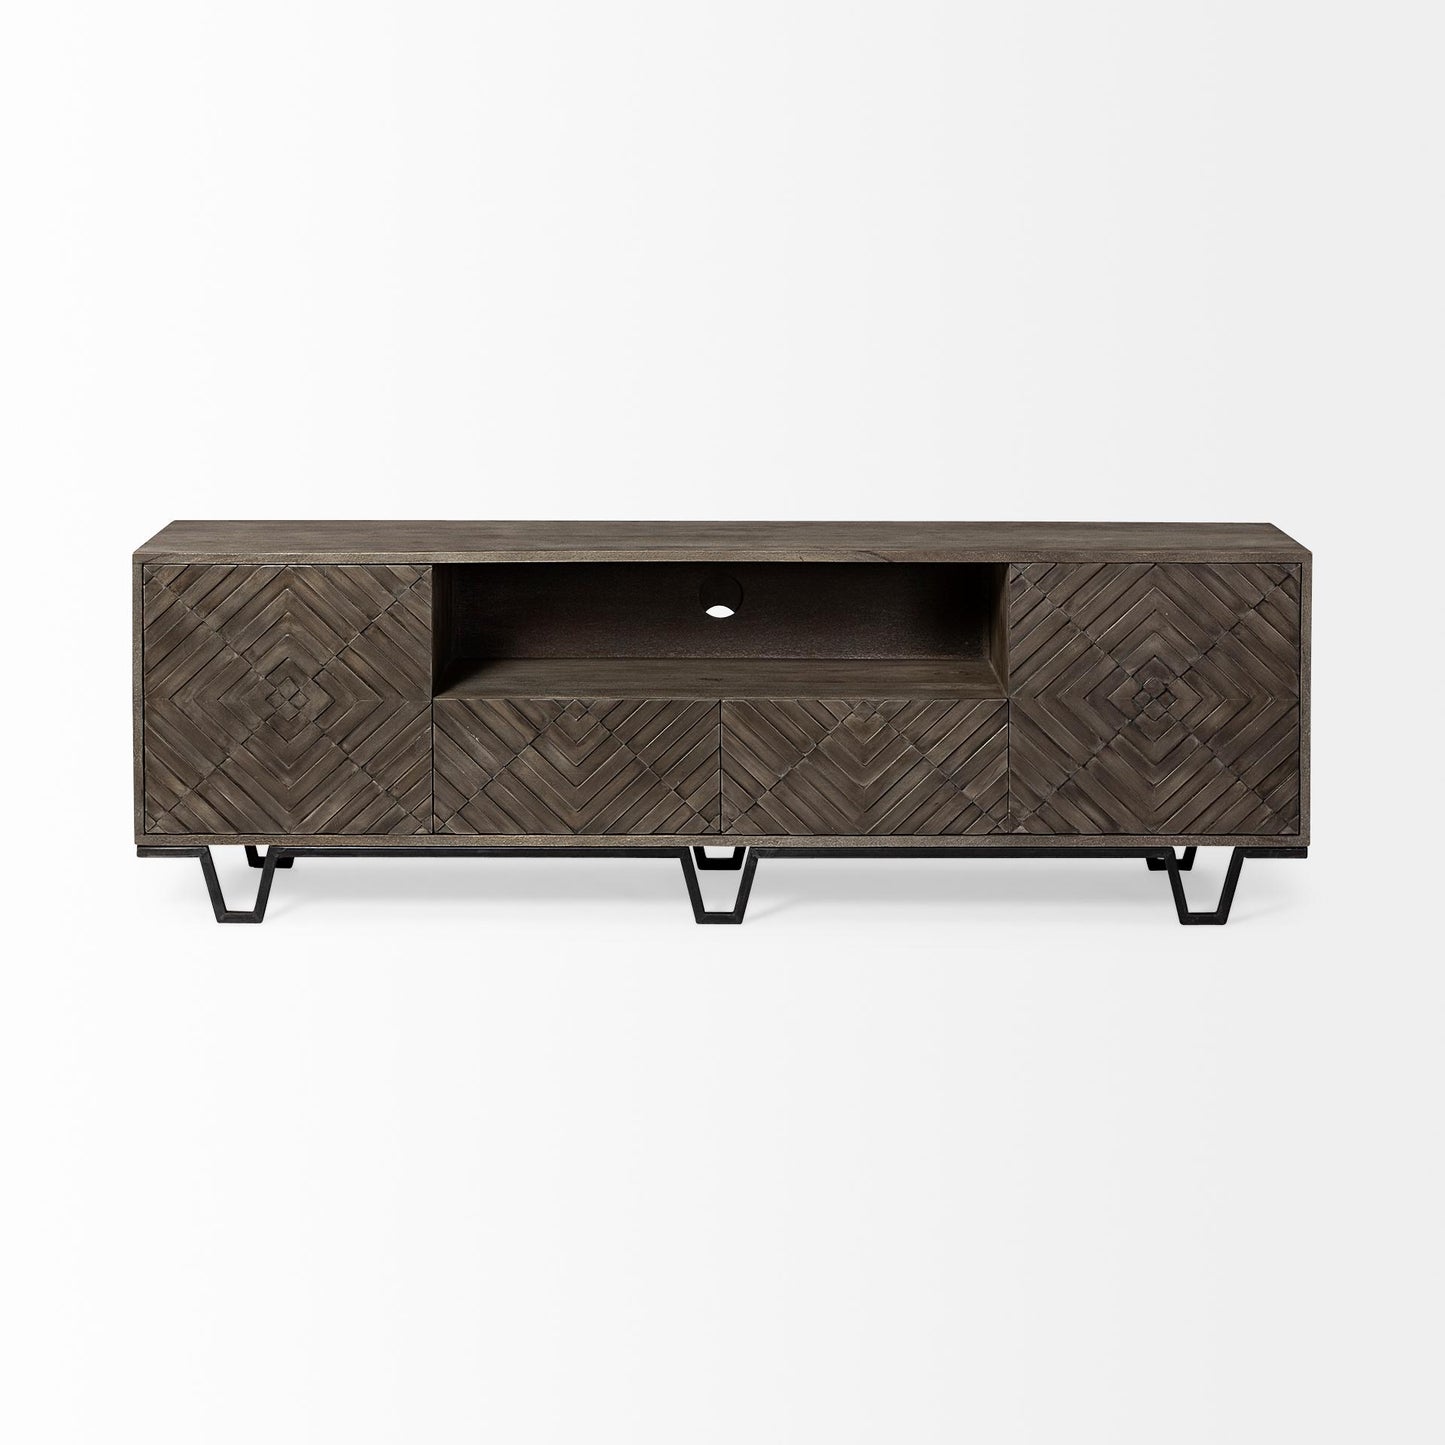 Argyle II Medium Brown Wood and Metal TV Stand Media Console with Storage, TV up to 75"